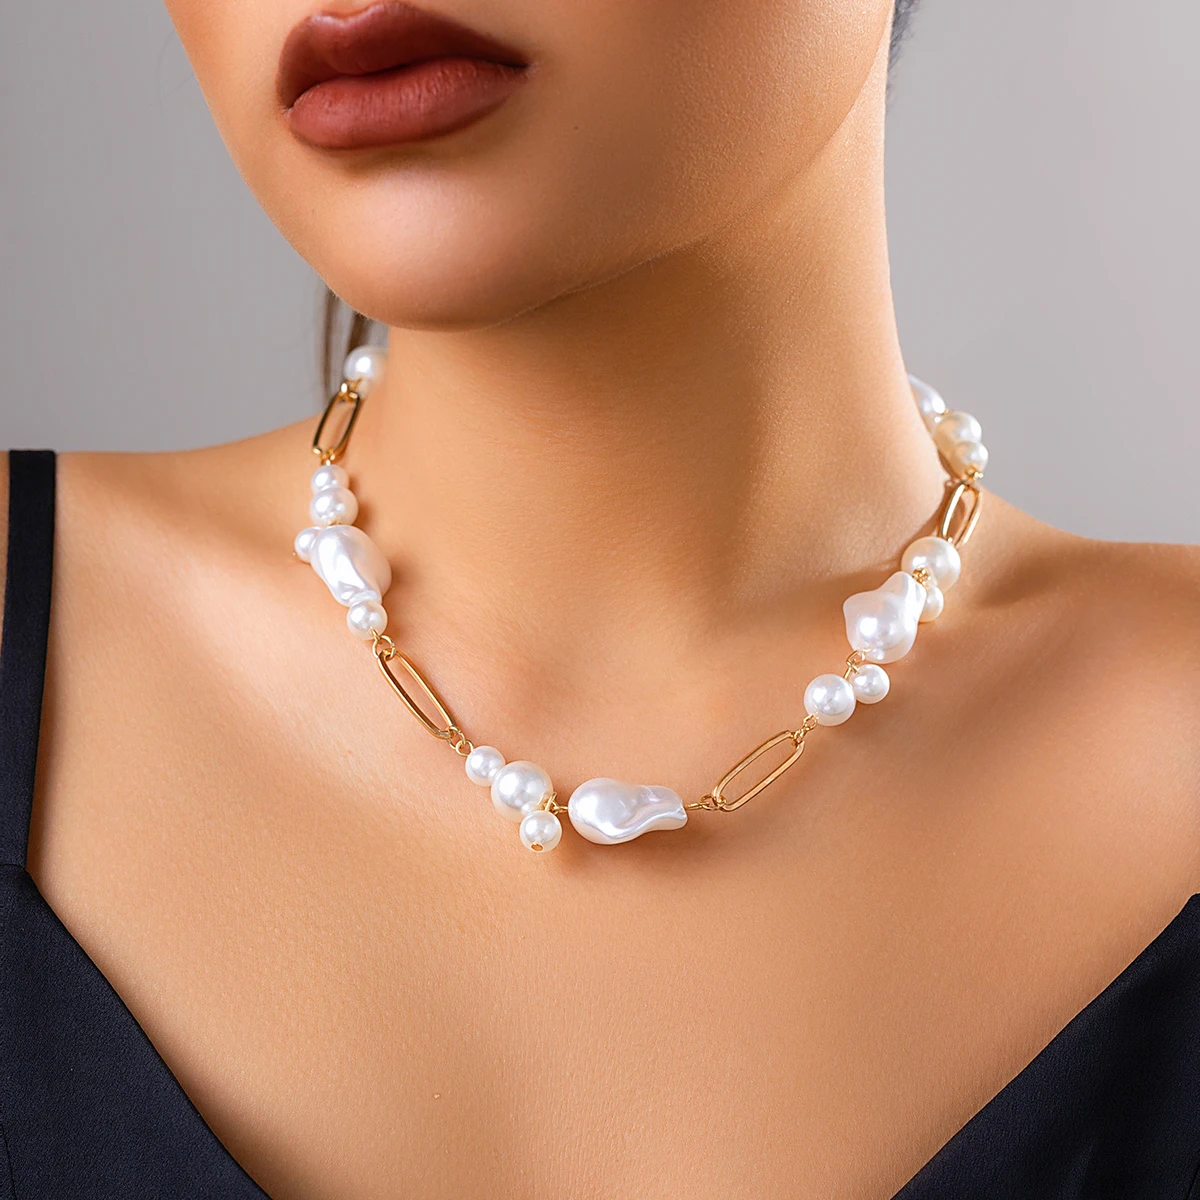 

Lacteo Classic Big Irregular Imitation Pearl Necklace Trendy Women Jewelry On The Neck Choker Collar Party Ladies Gifts Wedding